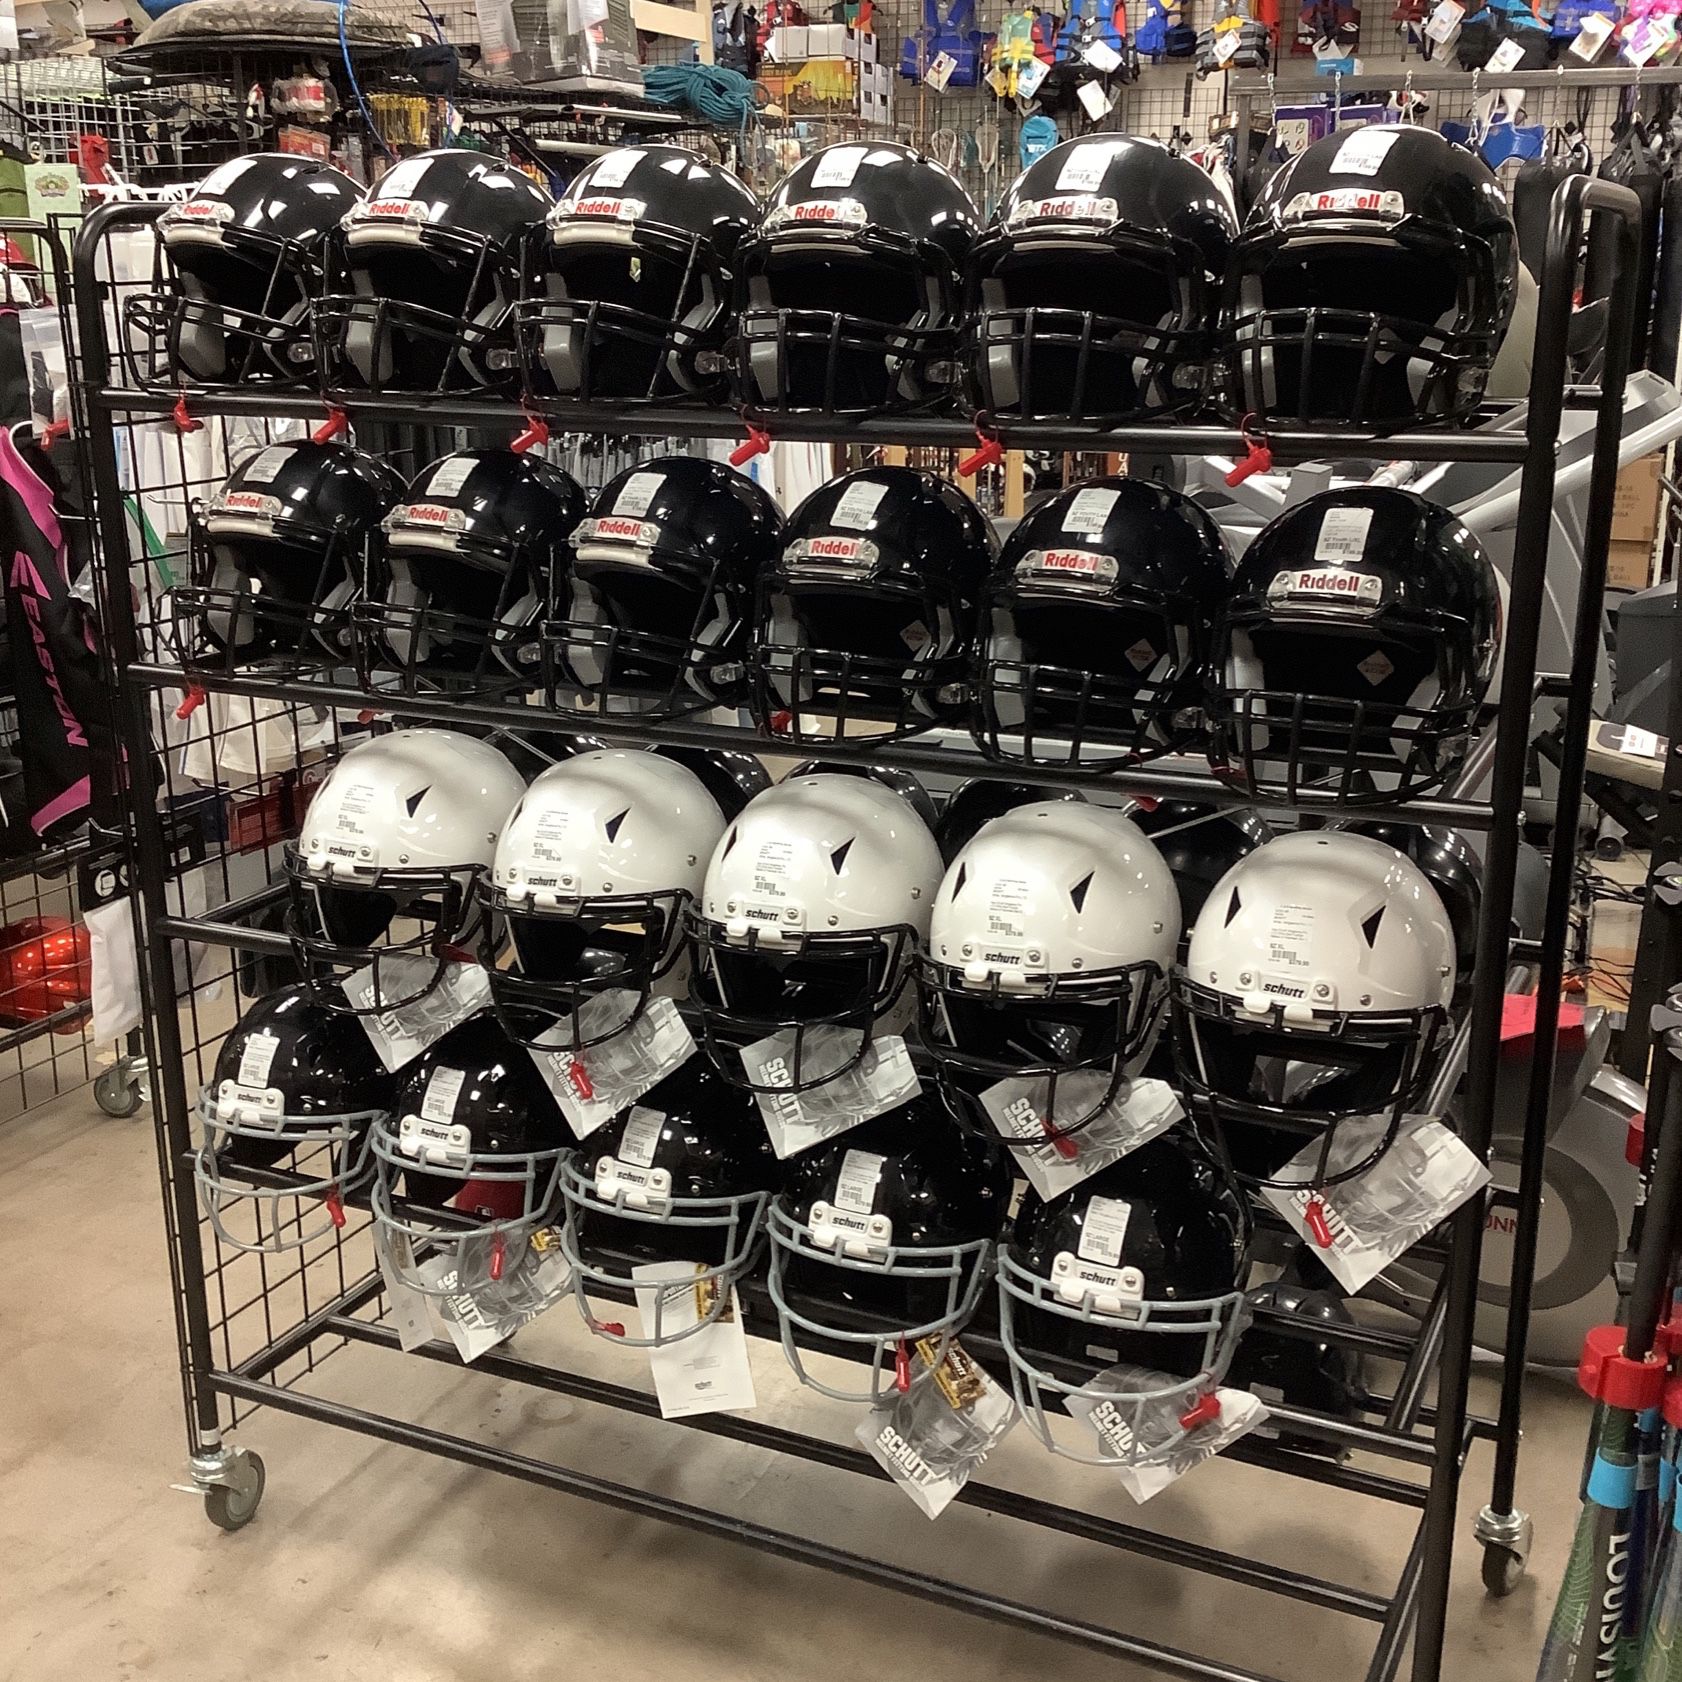 I paint Football helmets & backplates for Sale in Houston, TX - OfferUp